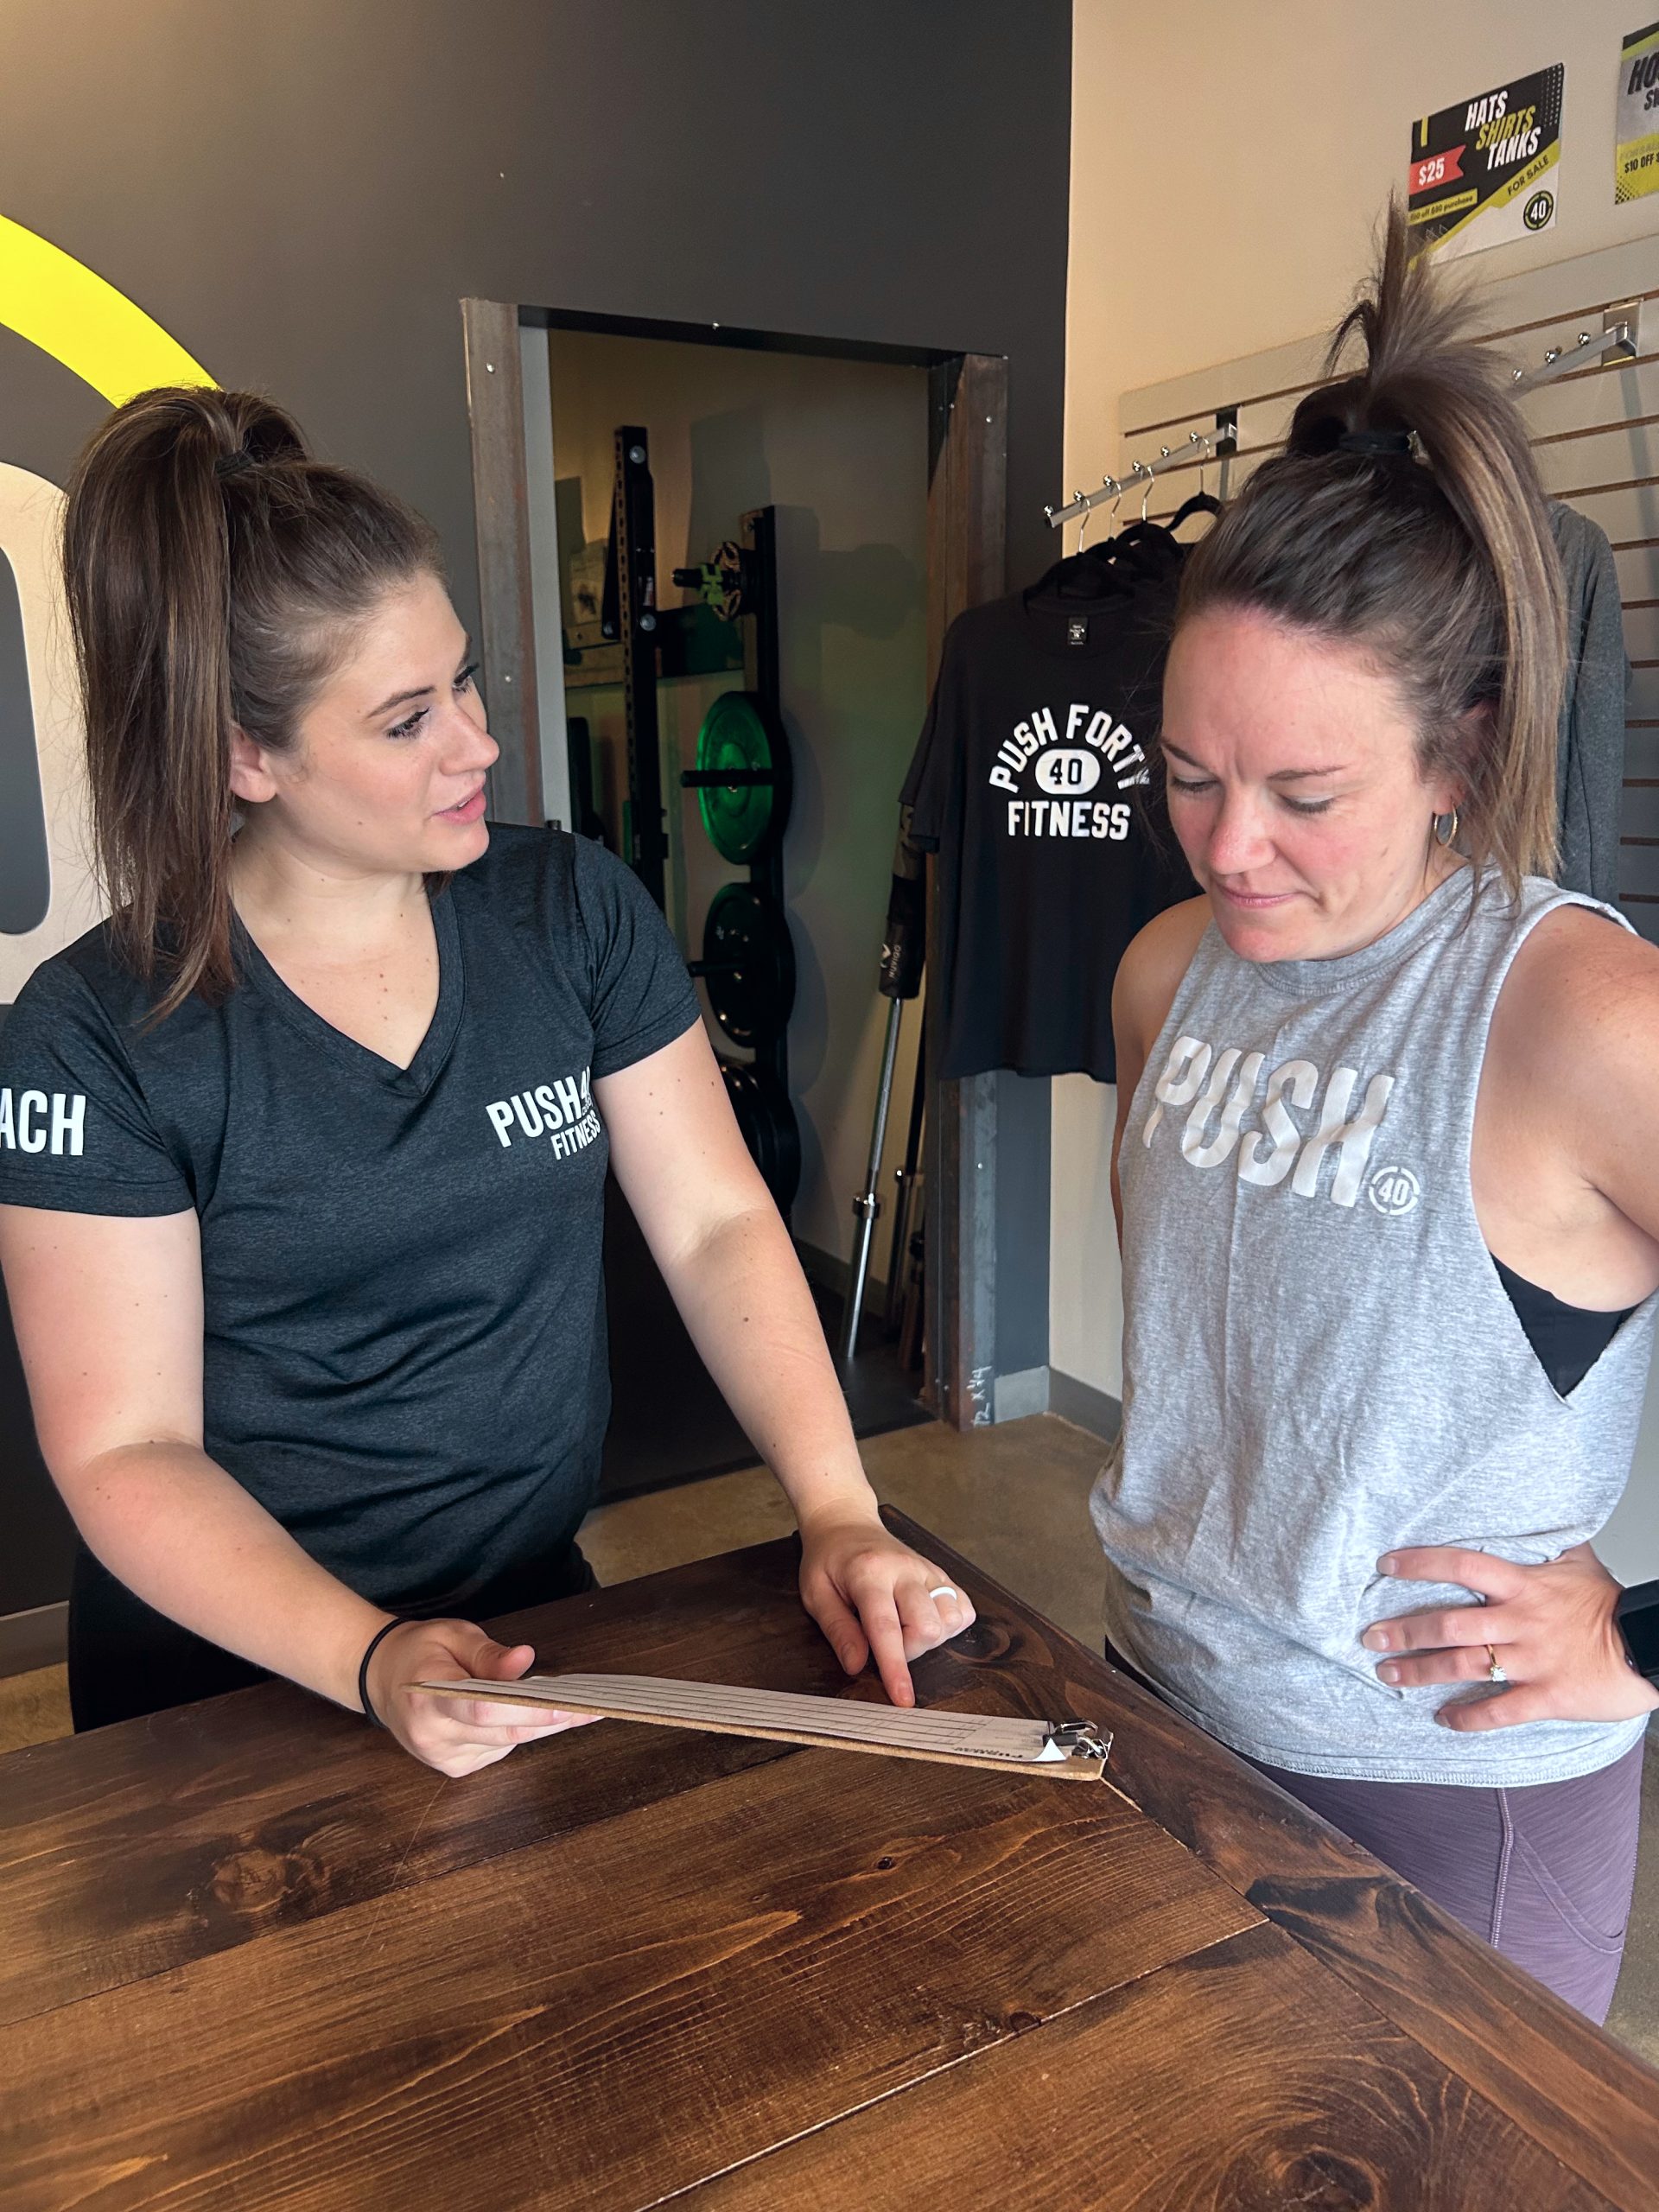 Coach Maura consulting with a member at the front desk of Push 40 Fitness.